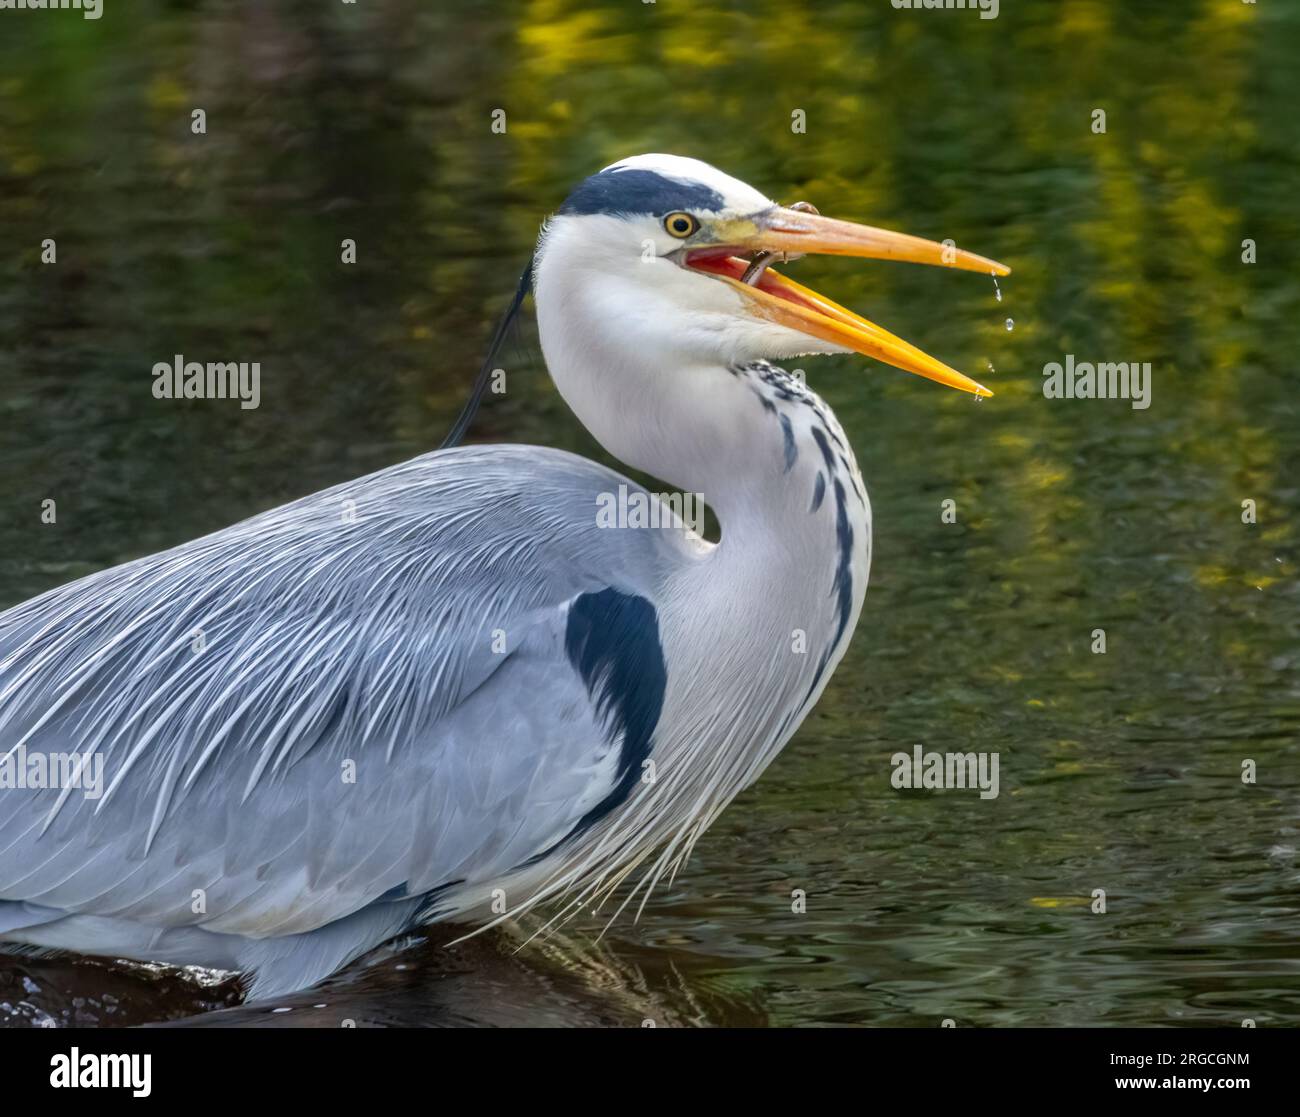 Large grey heron bird fishing in the river with natural green reflection Stock Photo